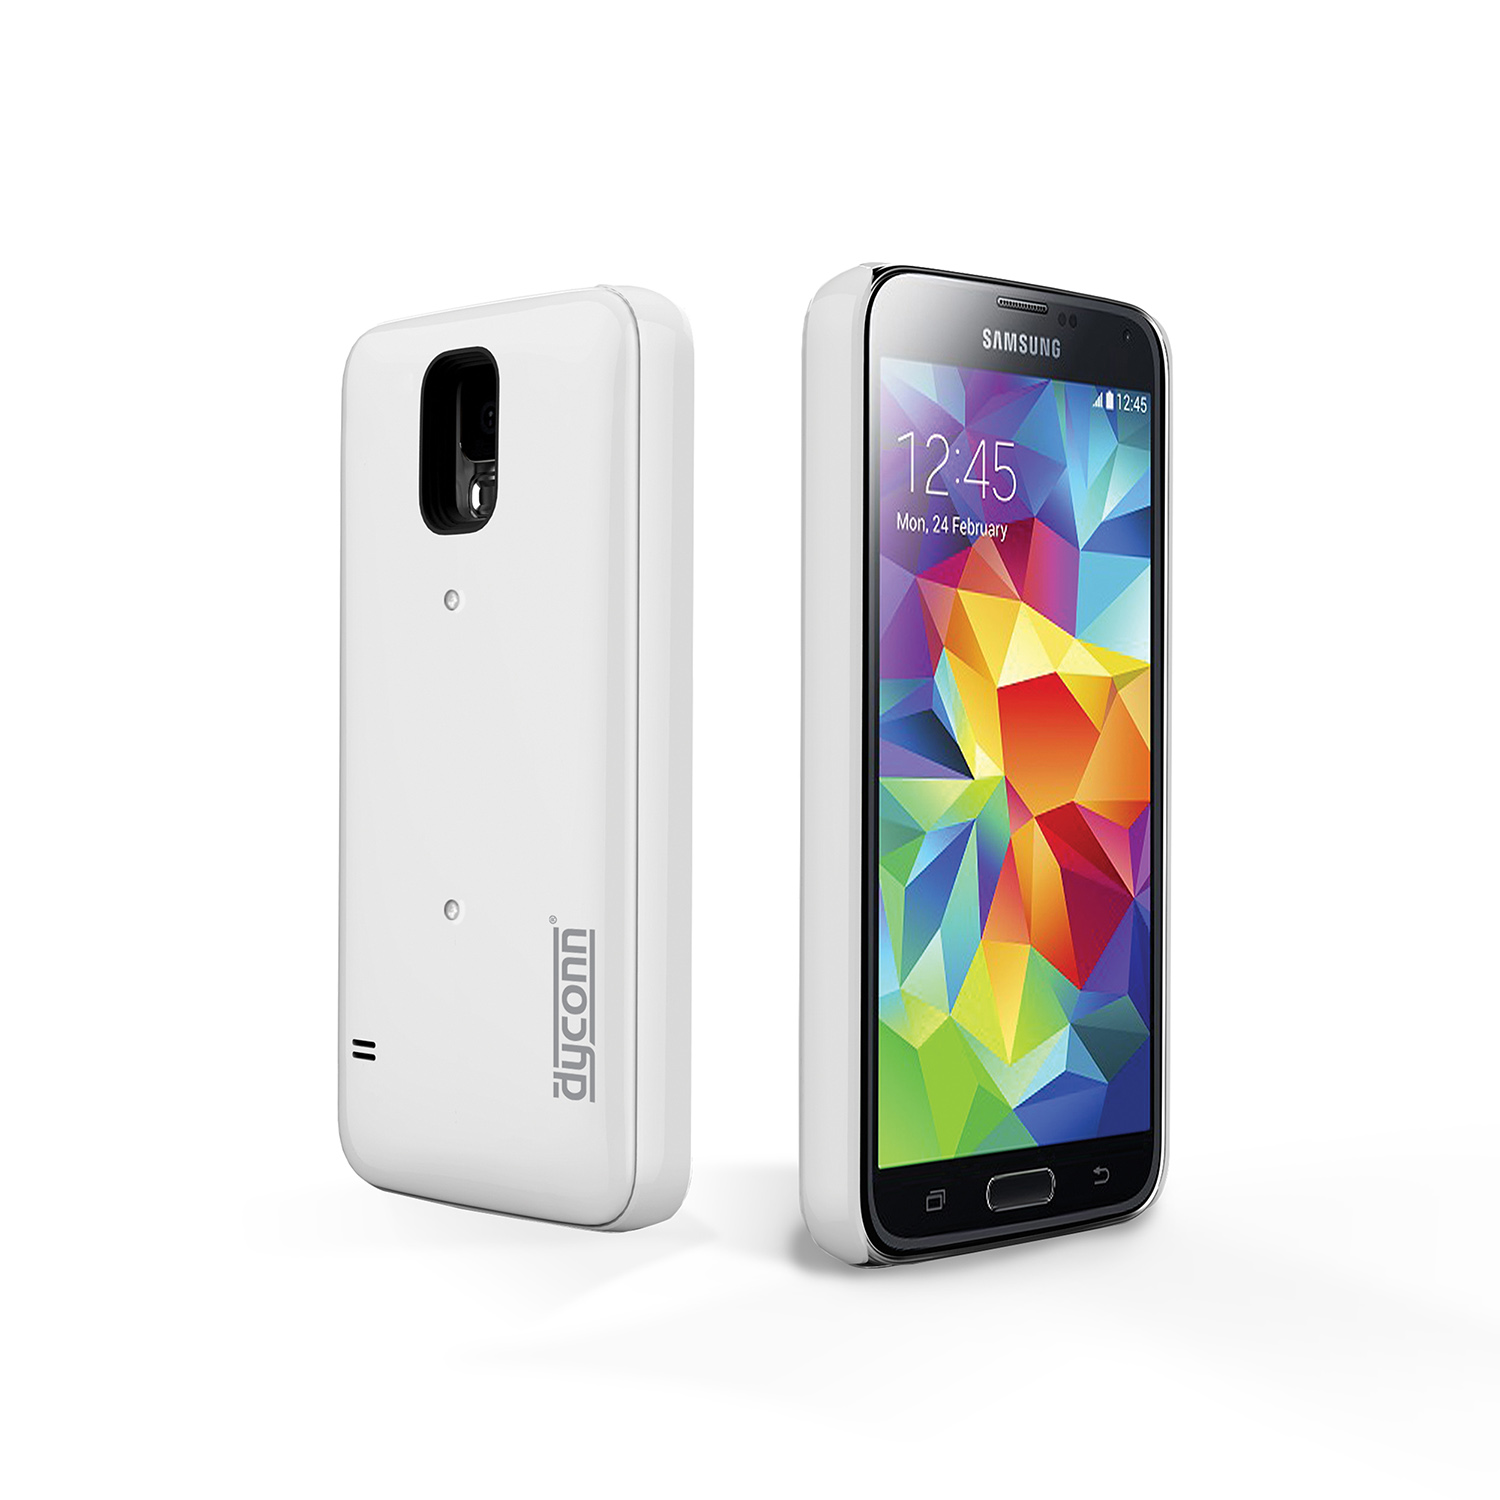 Samsung Galaxy S5 Full Phone Specifications